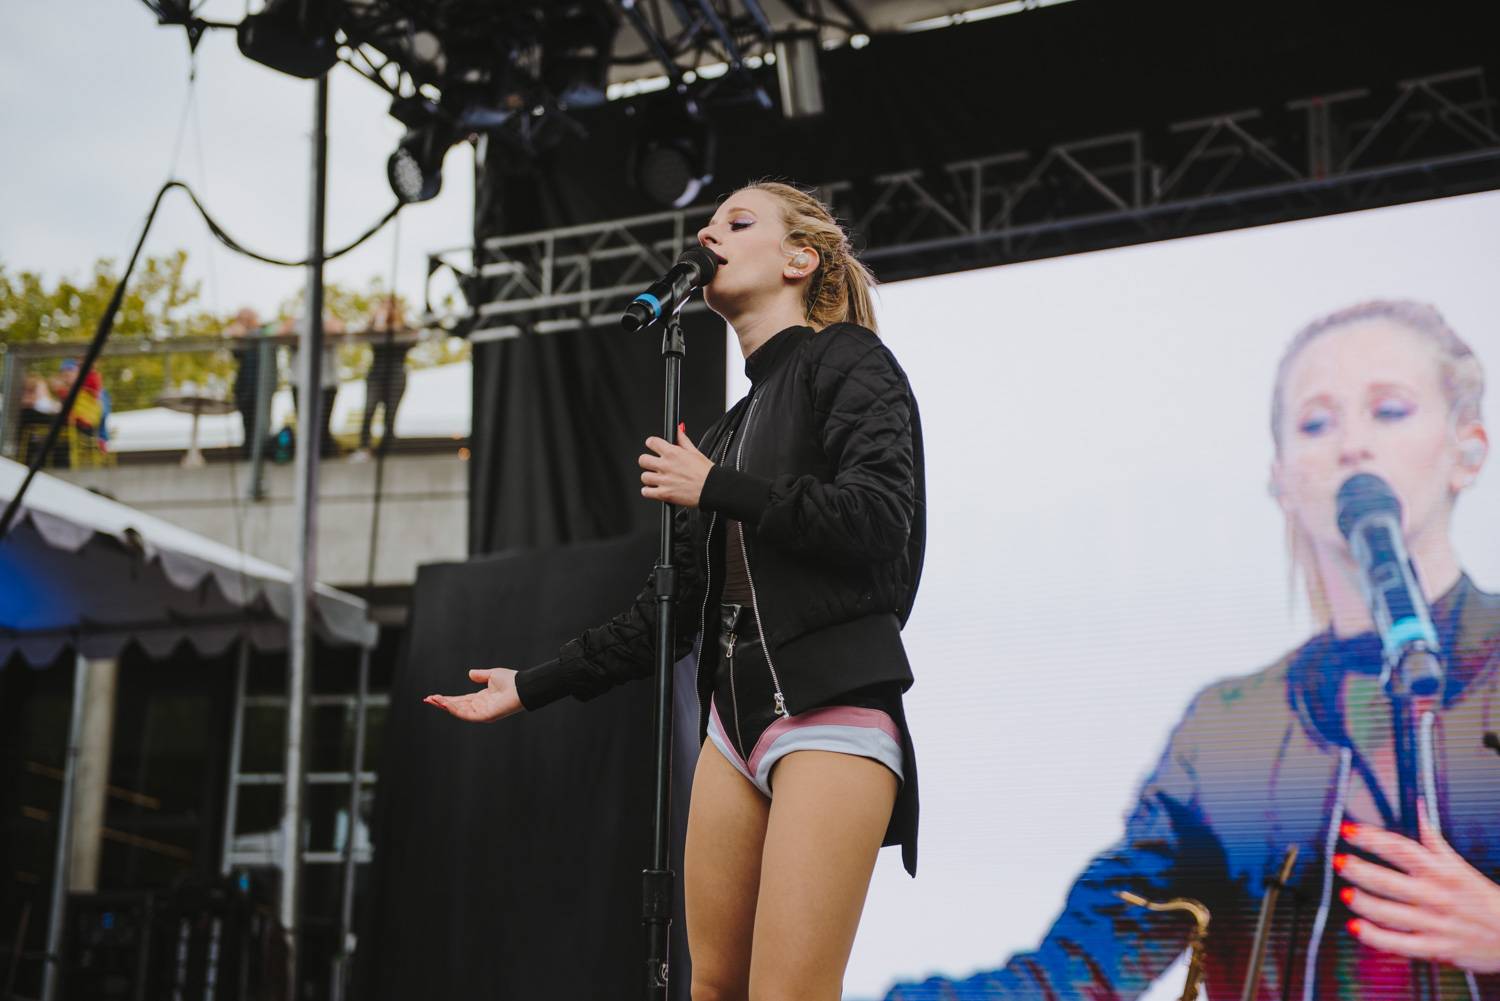 Marian Hill at the Bumbershoot Music Festival 2018 - Day 2. Sept 1 2018. Pavel Boiko photo.